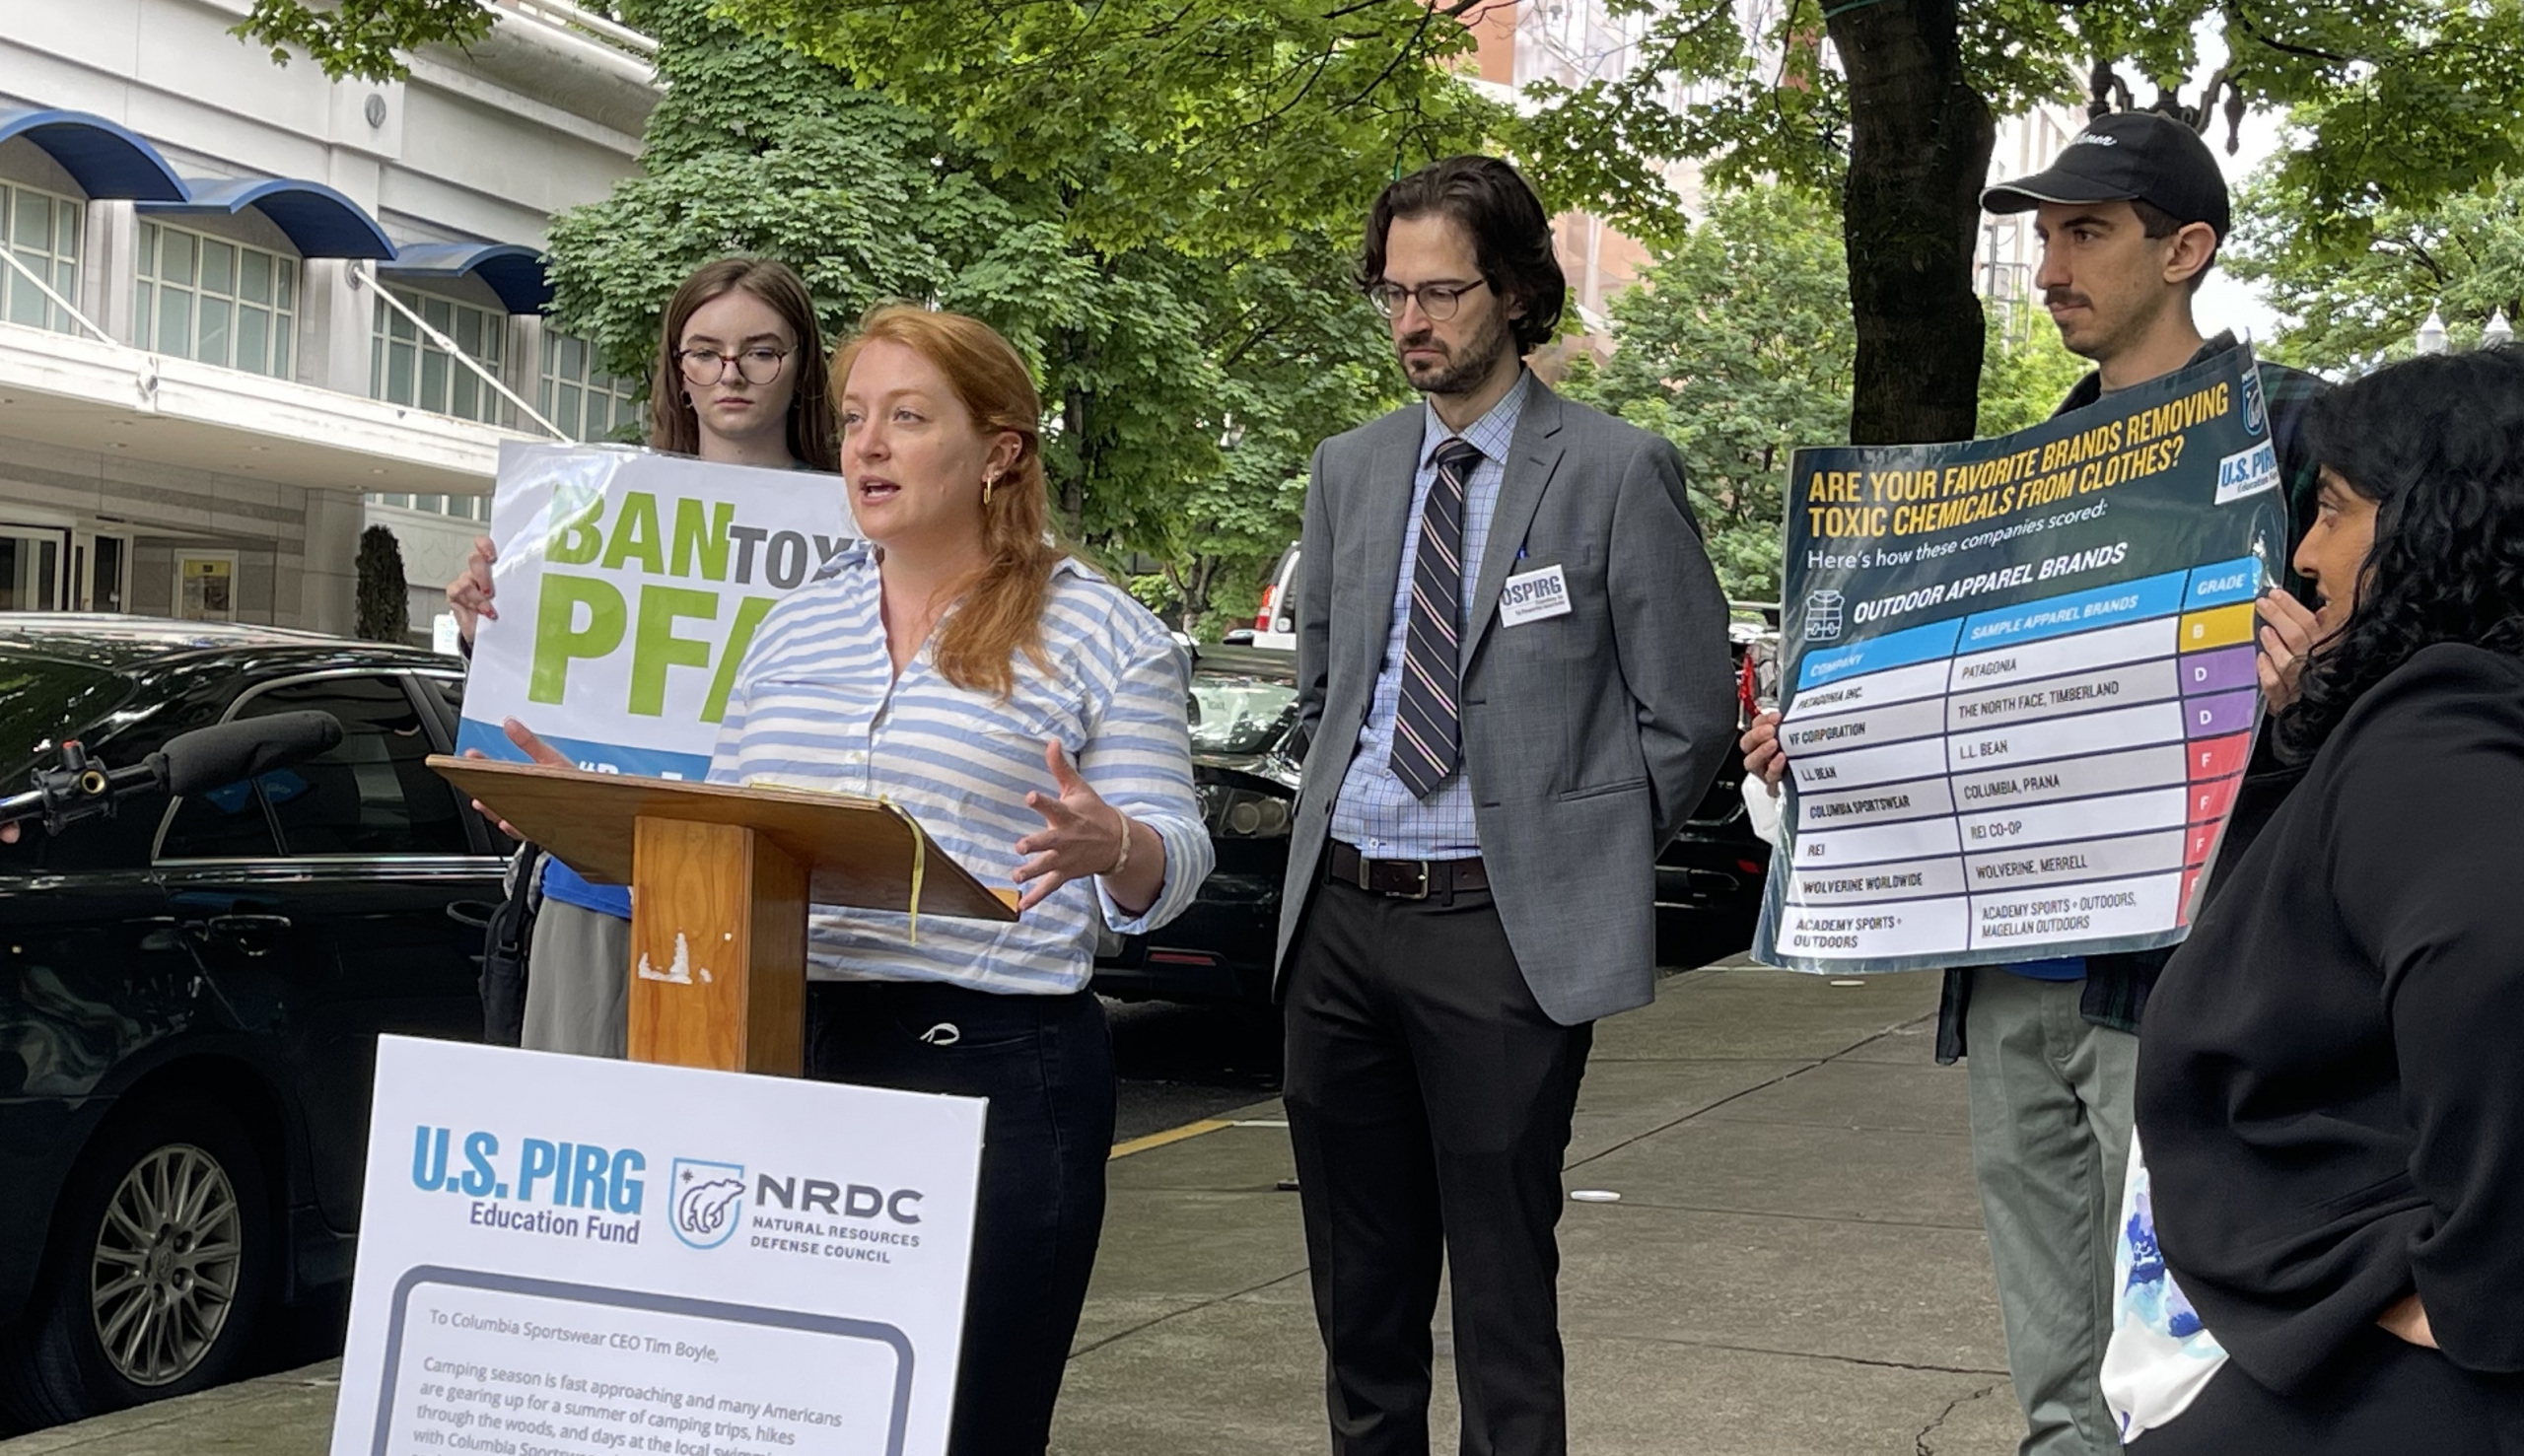 Speakers talk about the dangers of PFAS at the petition delivery event in Portland, OR